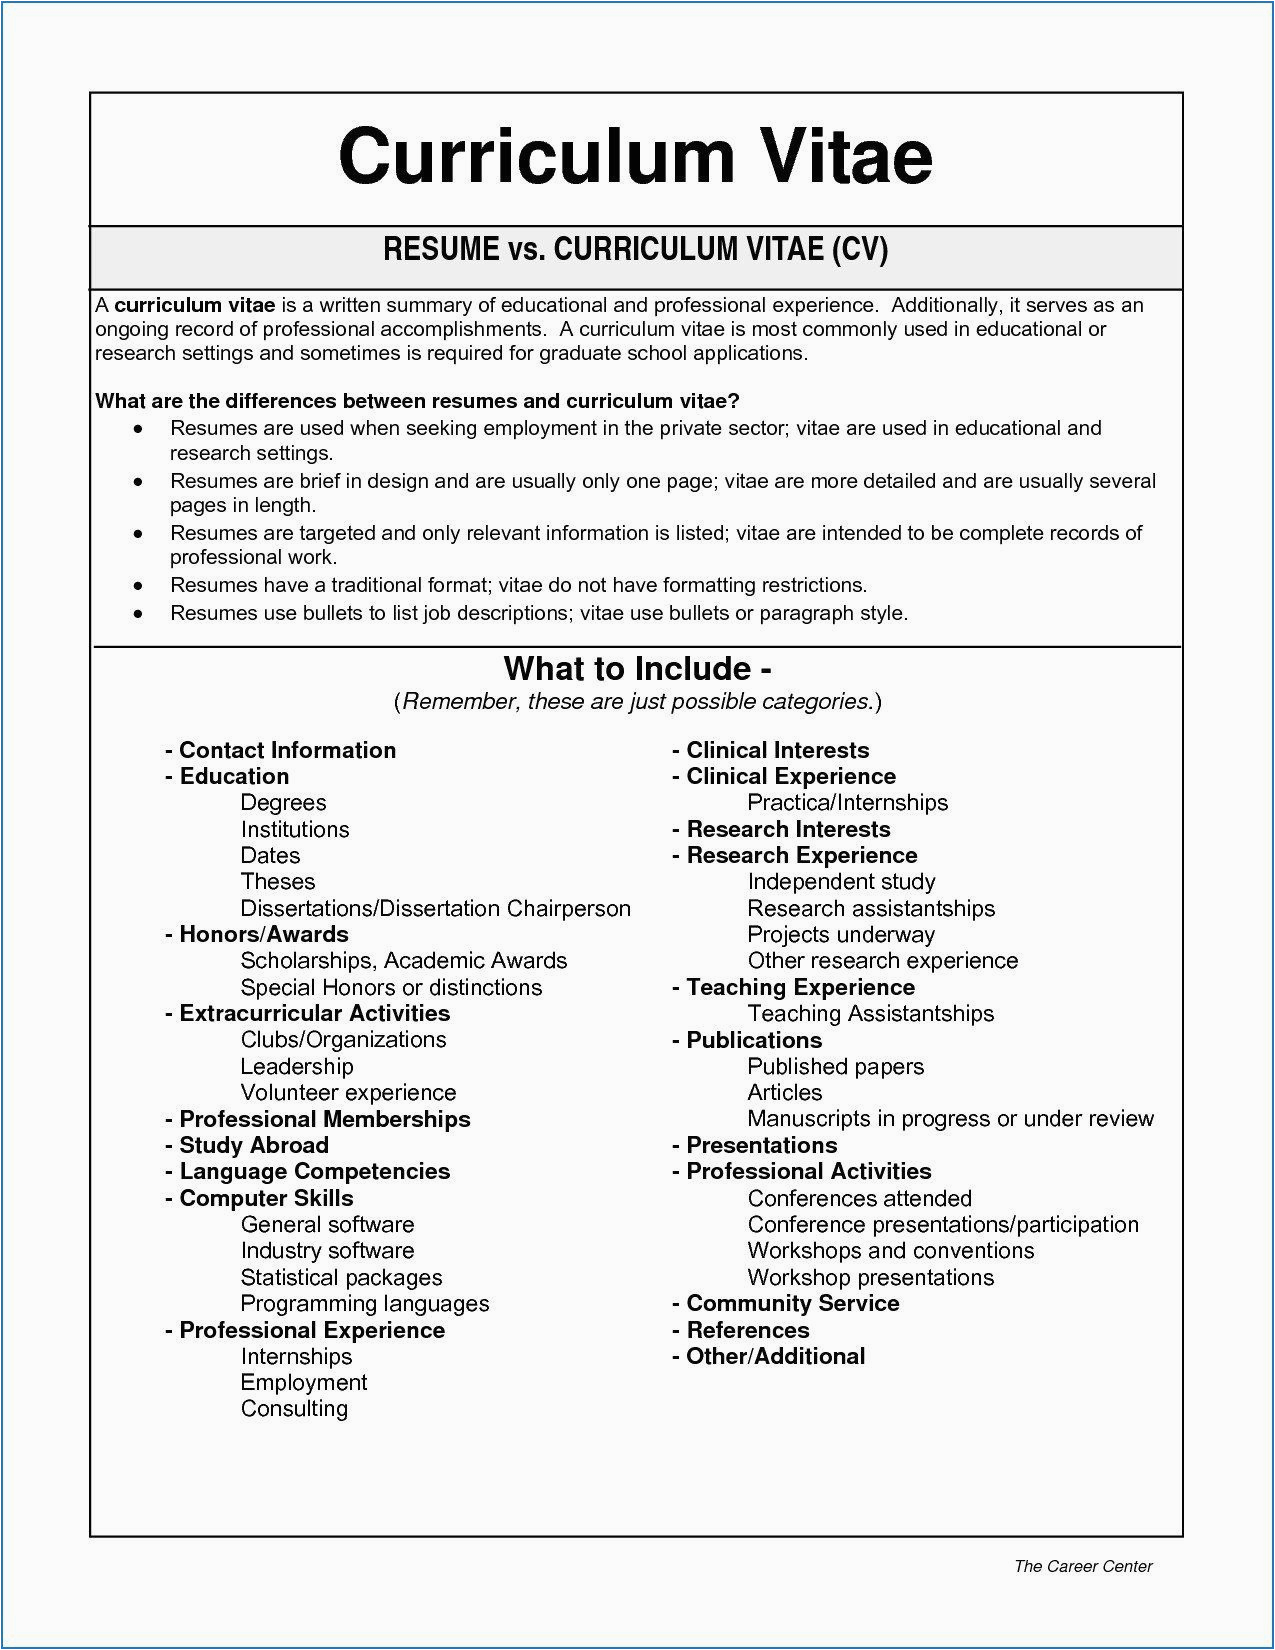 Extra Curricular Activities Sample for Resume Resume format Extracurricular Activities Liscrag